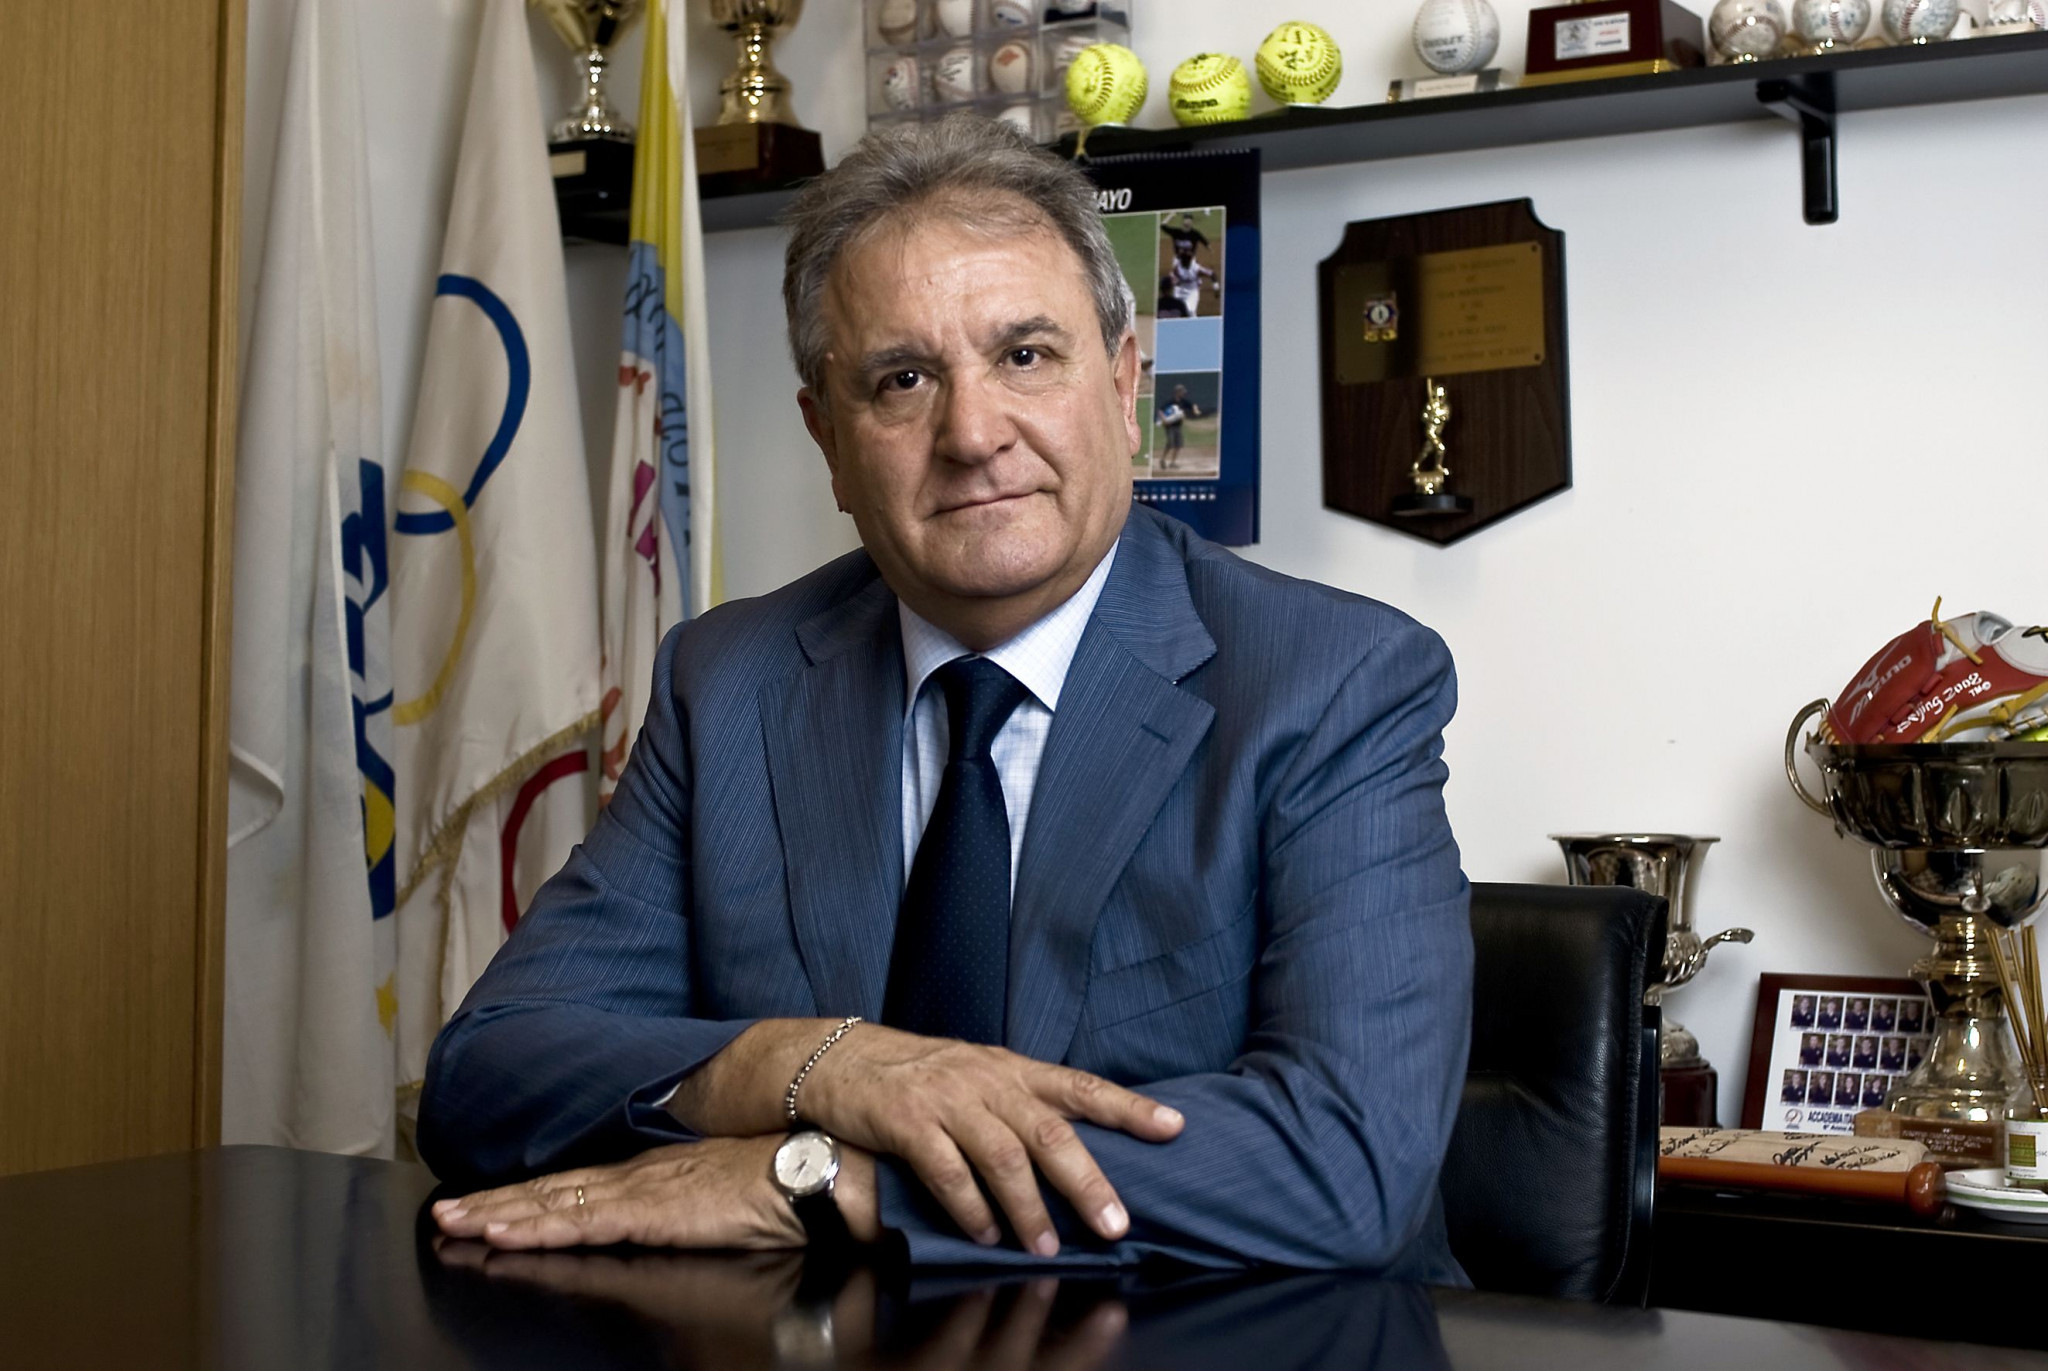 WBSC President Riccardo Fraccari has highlighted the role of baseball in sport returning in Japan ©WBSC